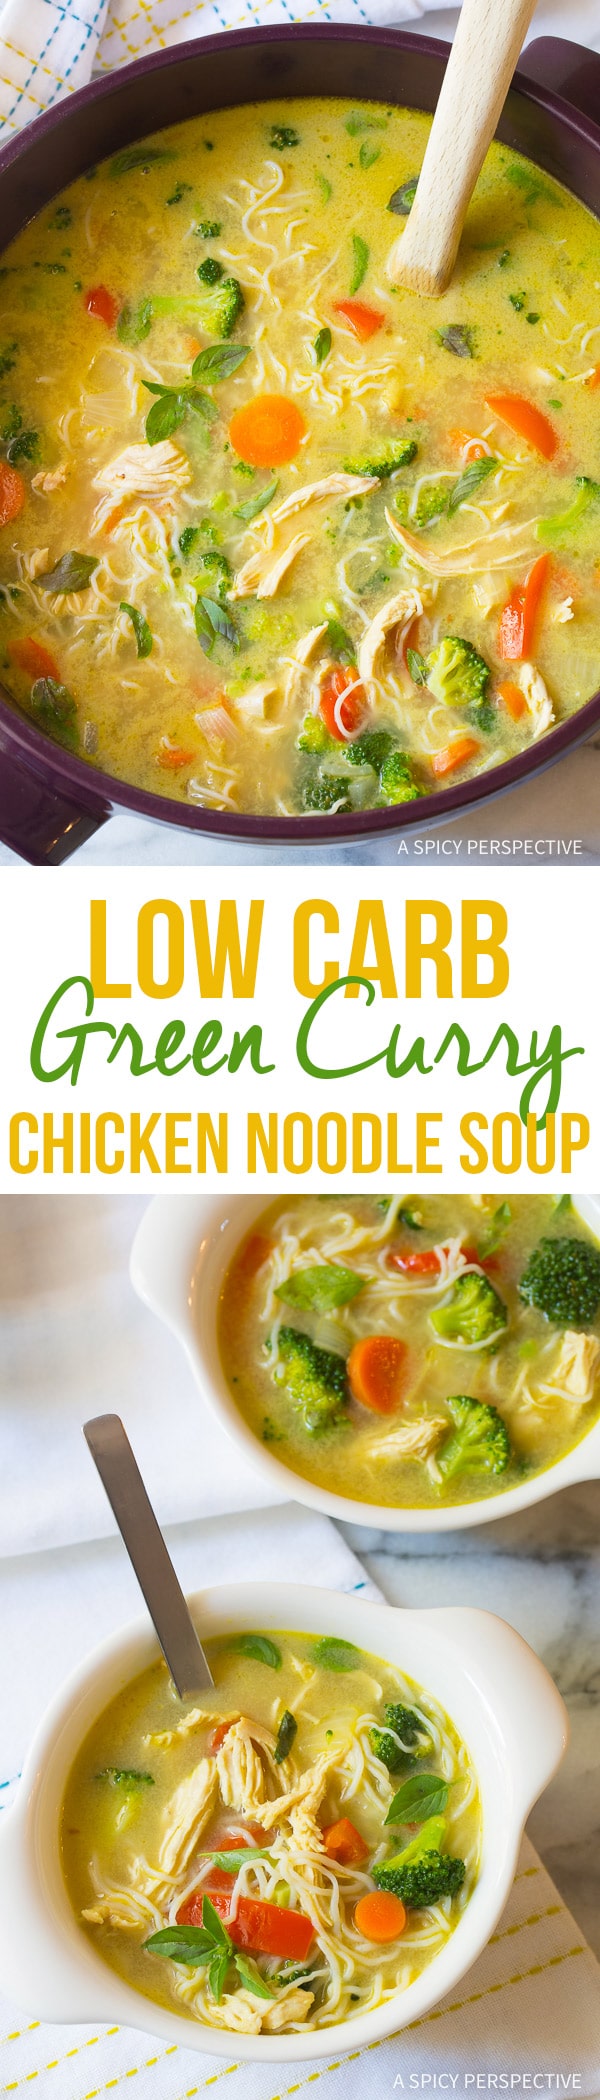 Amazing Low Carb Green Curry Chicken Noodle Soup Recipe (Paleo & Ketogenic)